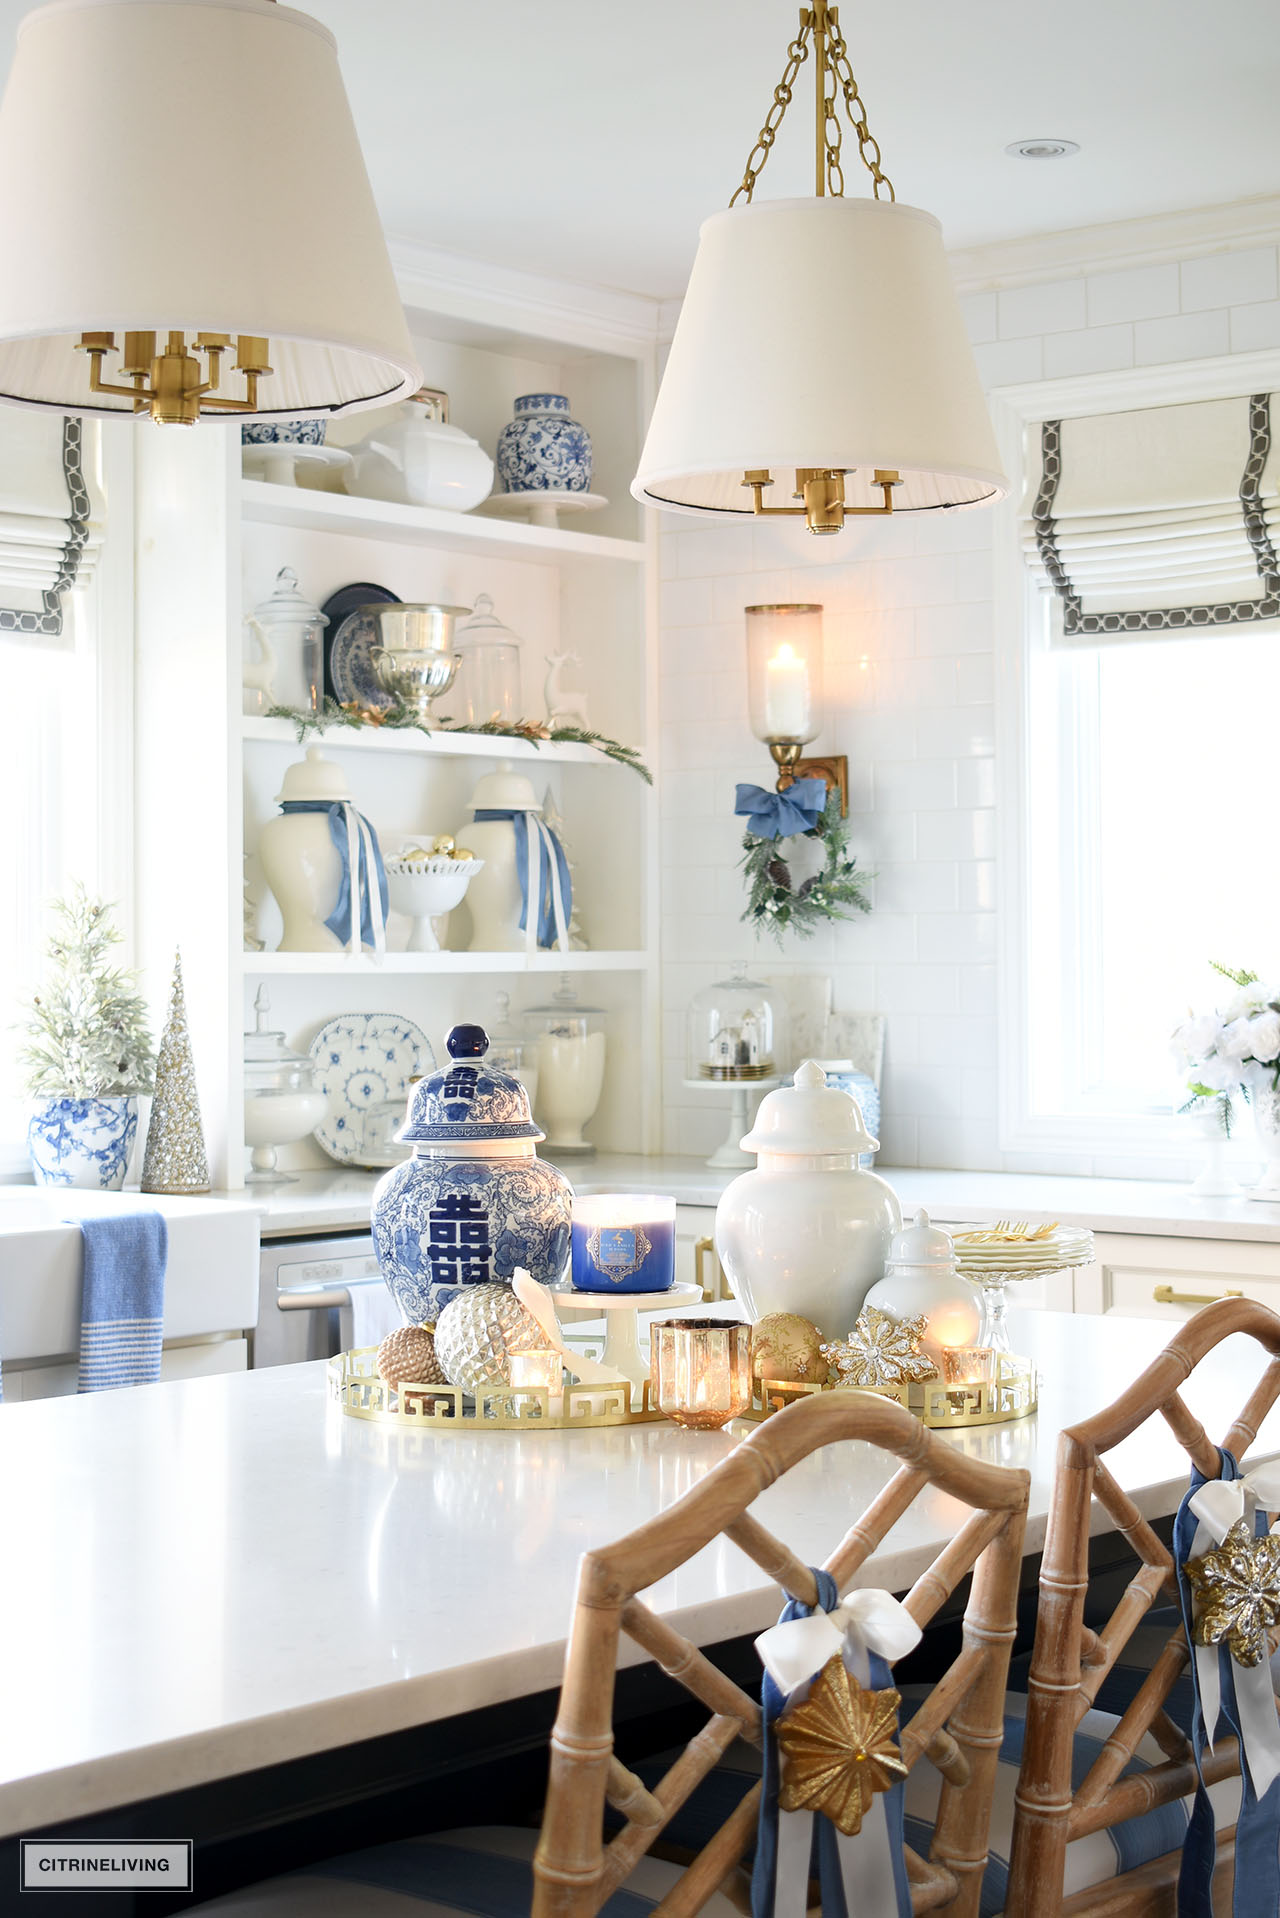 Kitchen Island withe gold trays, ginger jars, candles and ornaments creates a gorge Christmas display.